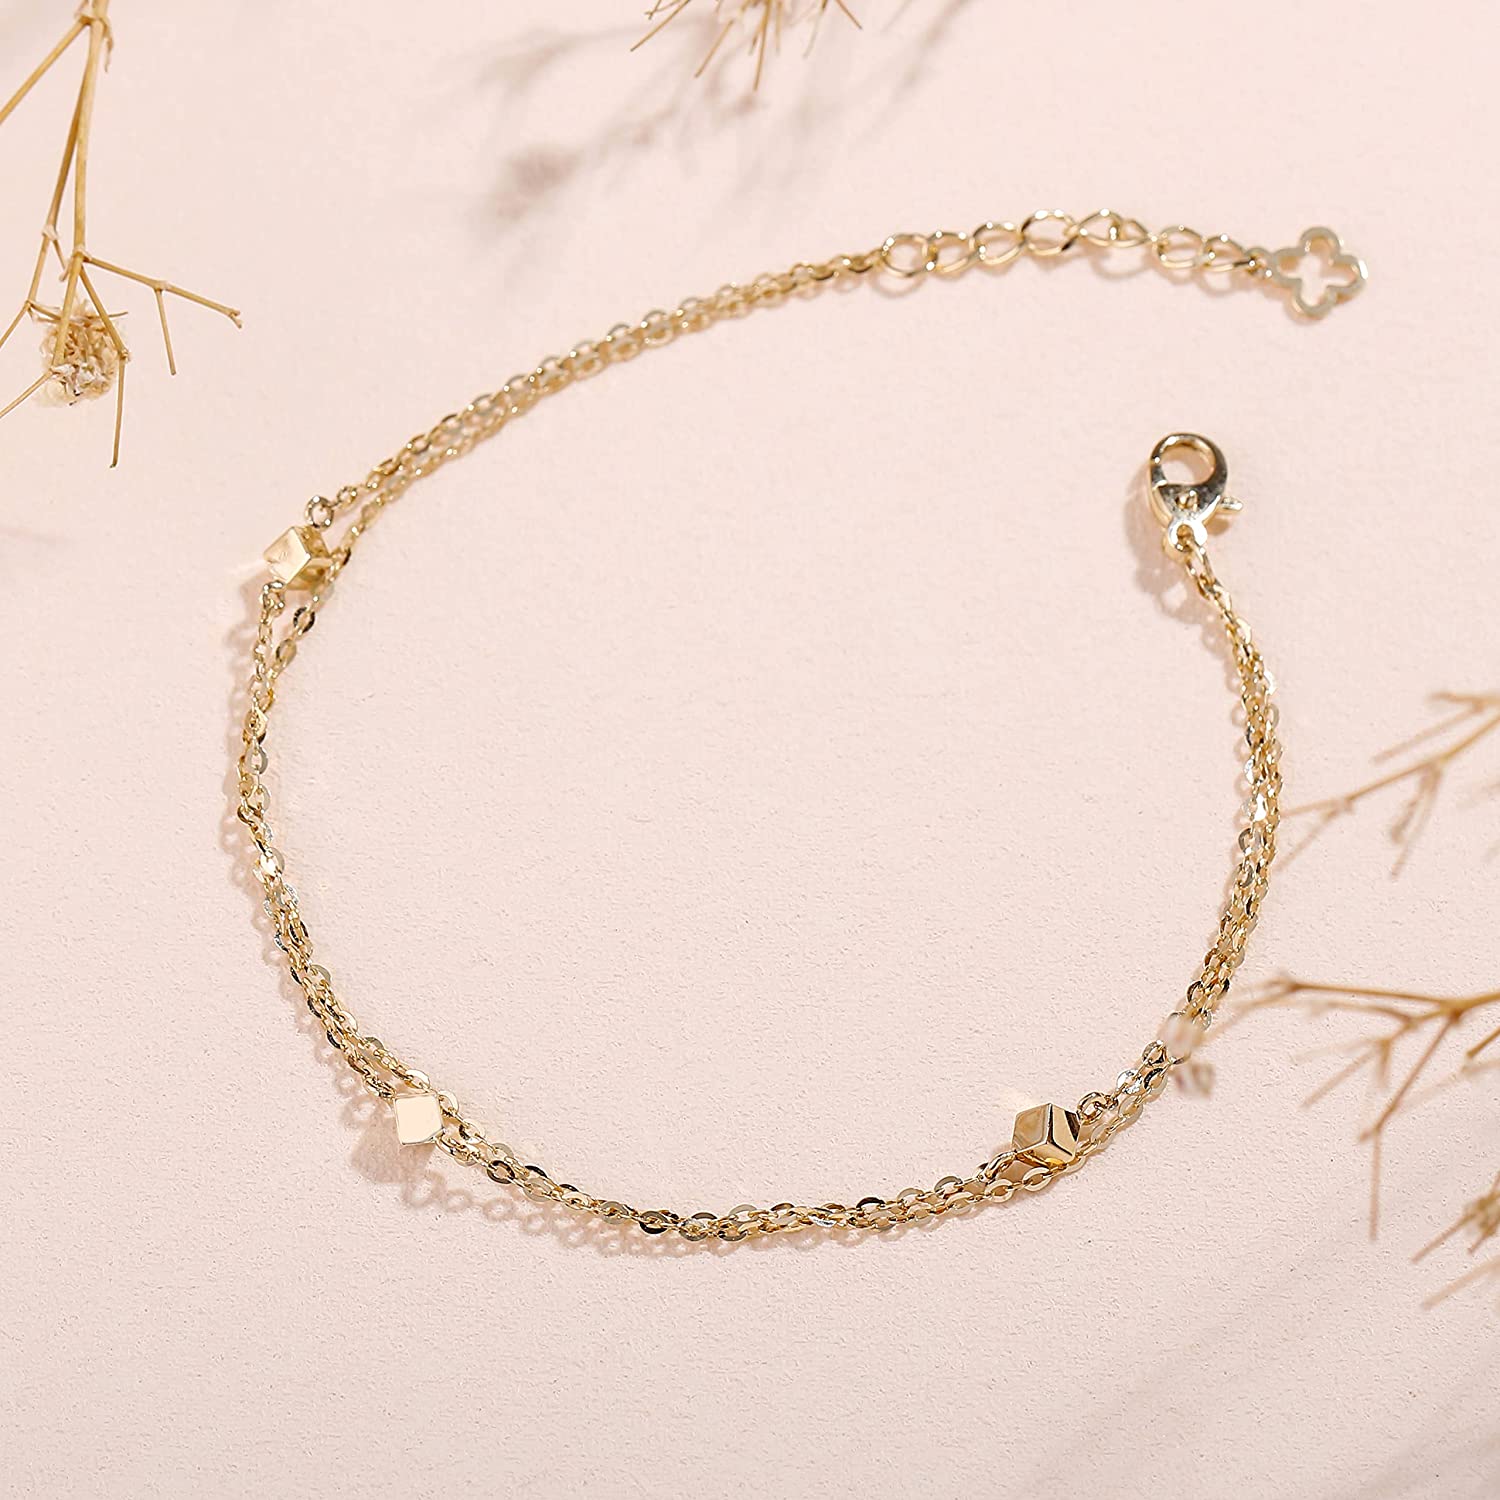 FANCIME Minimalist Design With Cubic Beads 14K Yellow Gold Bracelet Full